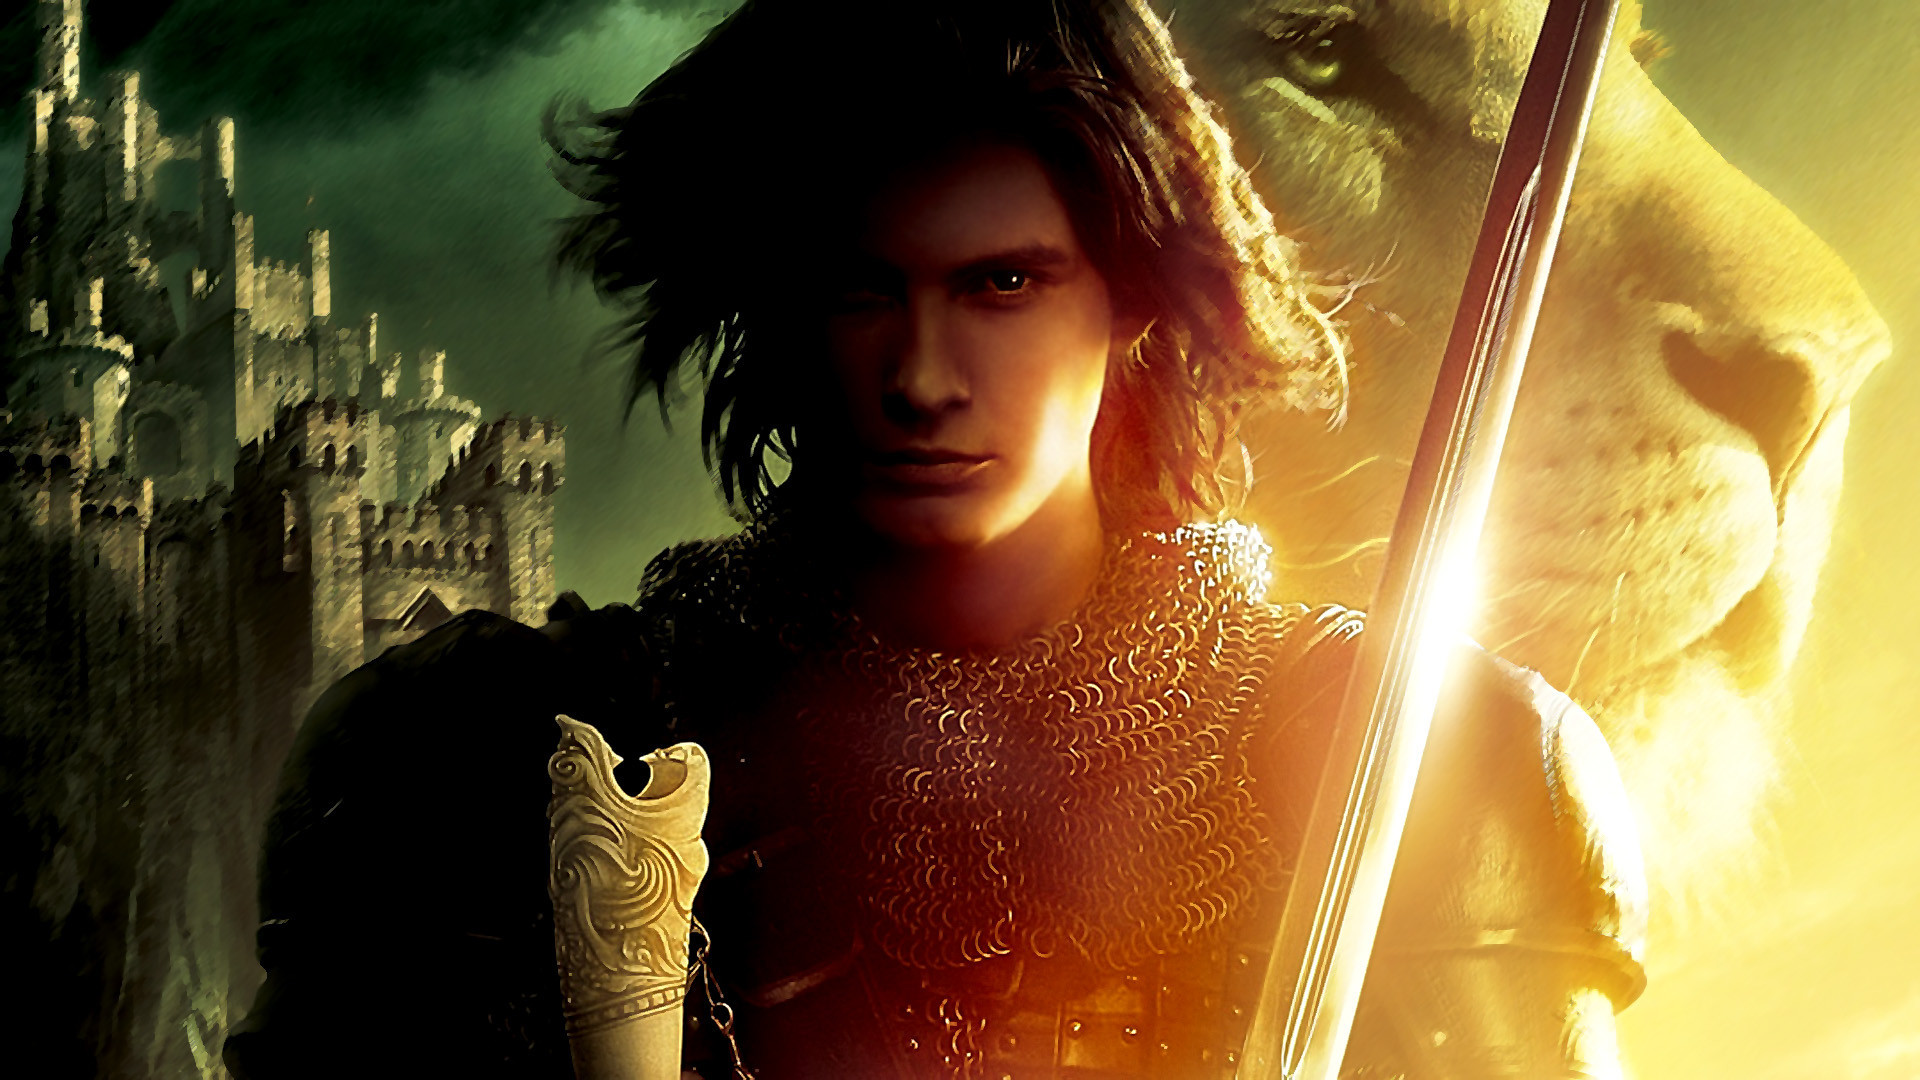 Movie The Chronicles of Narnia: Prince Caspian HD Wallpaper | Background Image